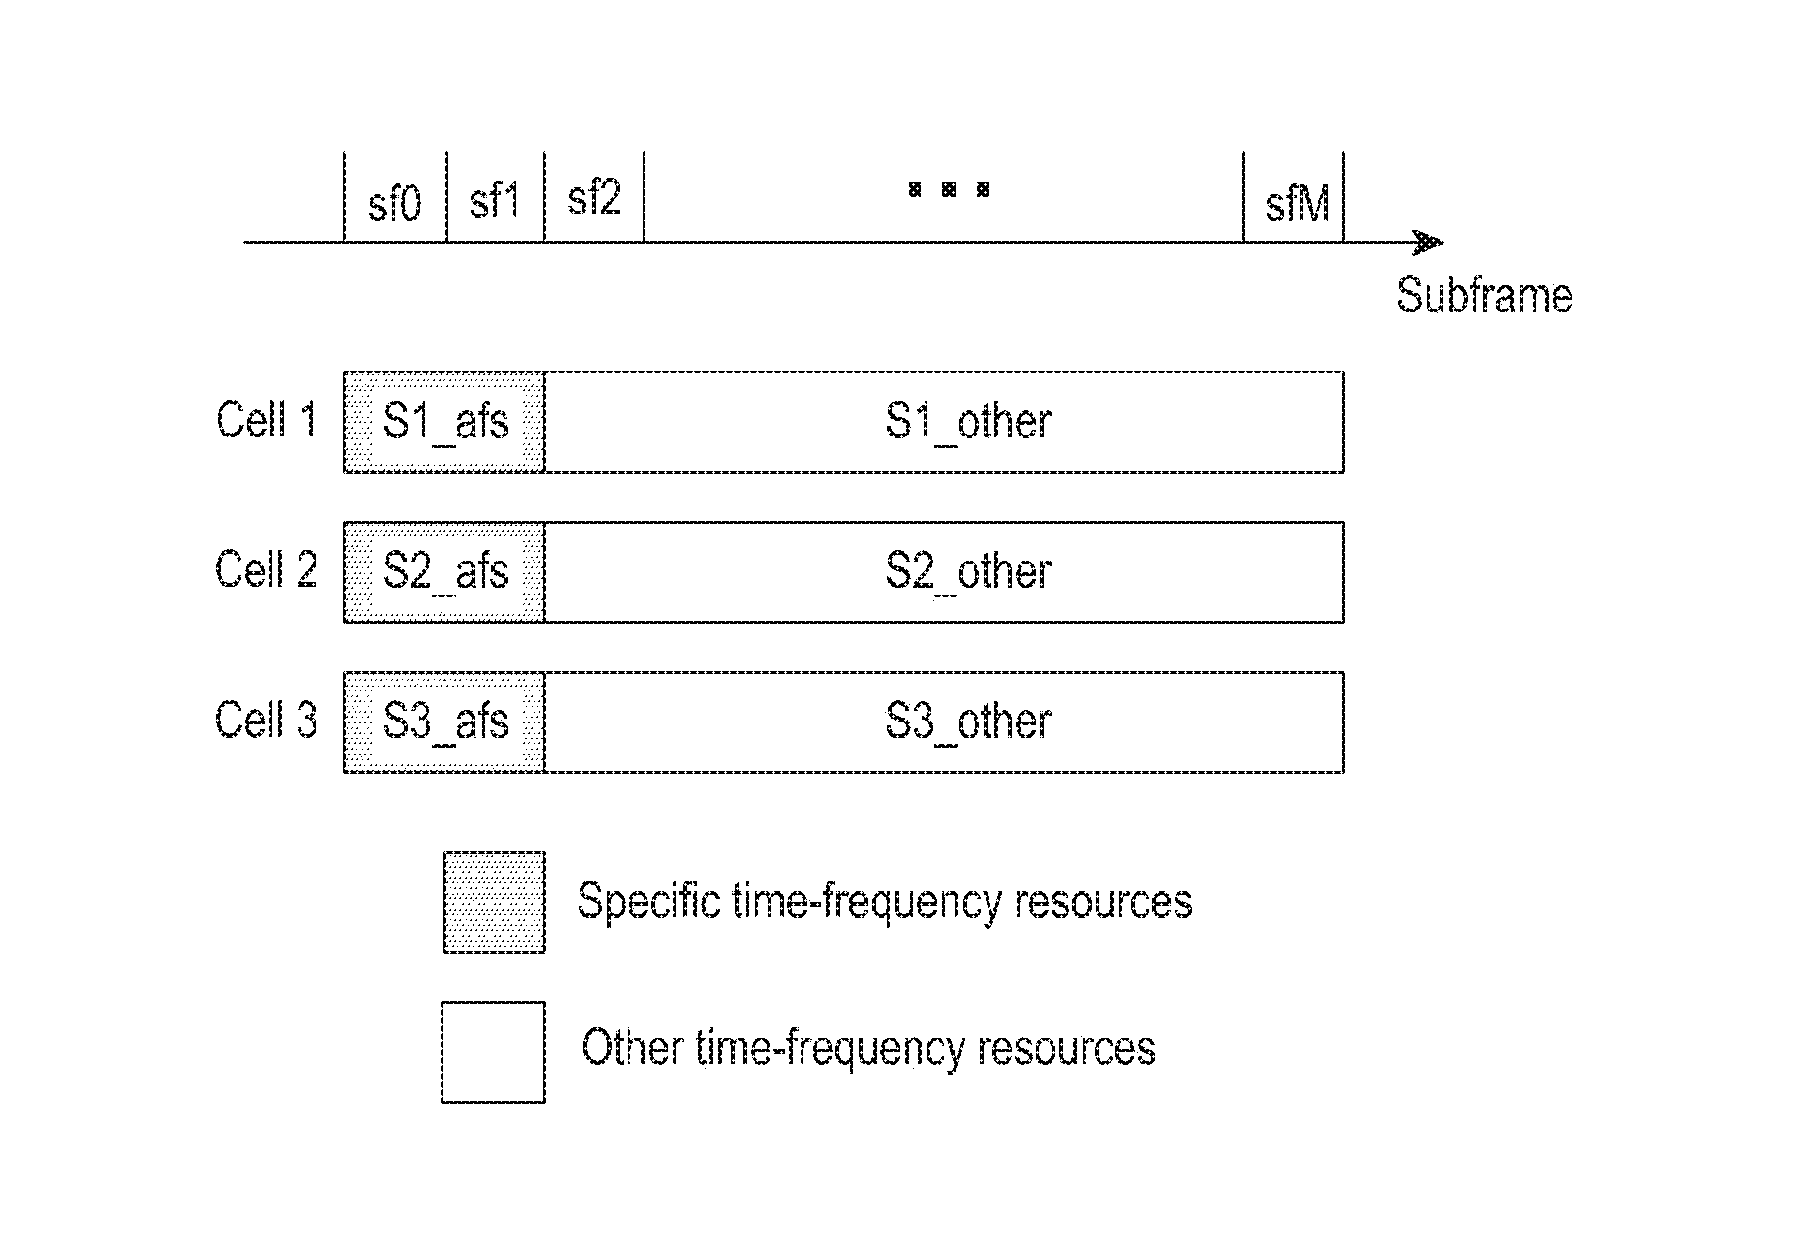 Method and equipment for processing interference signals